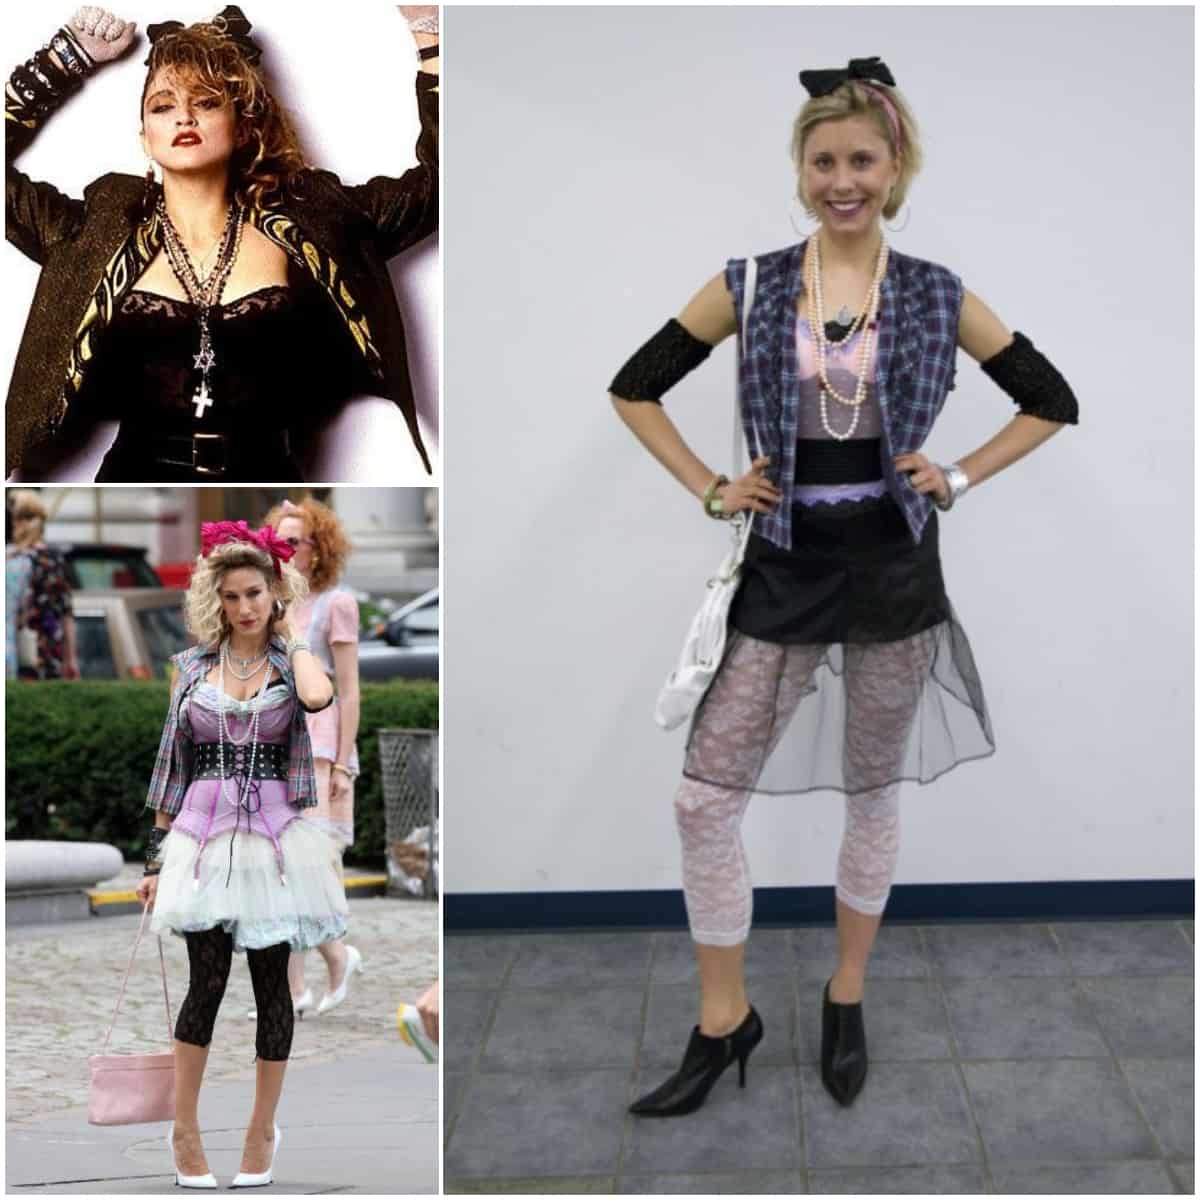 Recreating Madonna 80s Look: How to Rock Madonna-Style (With Final